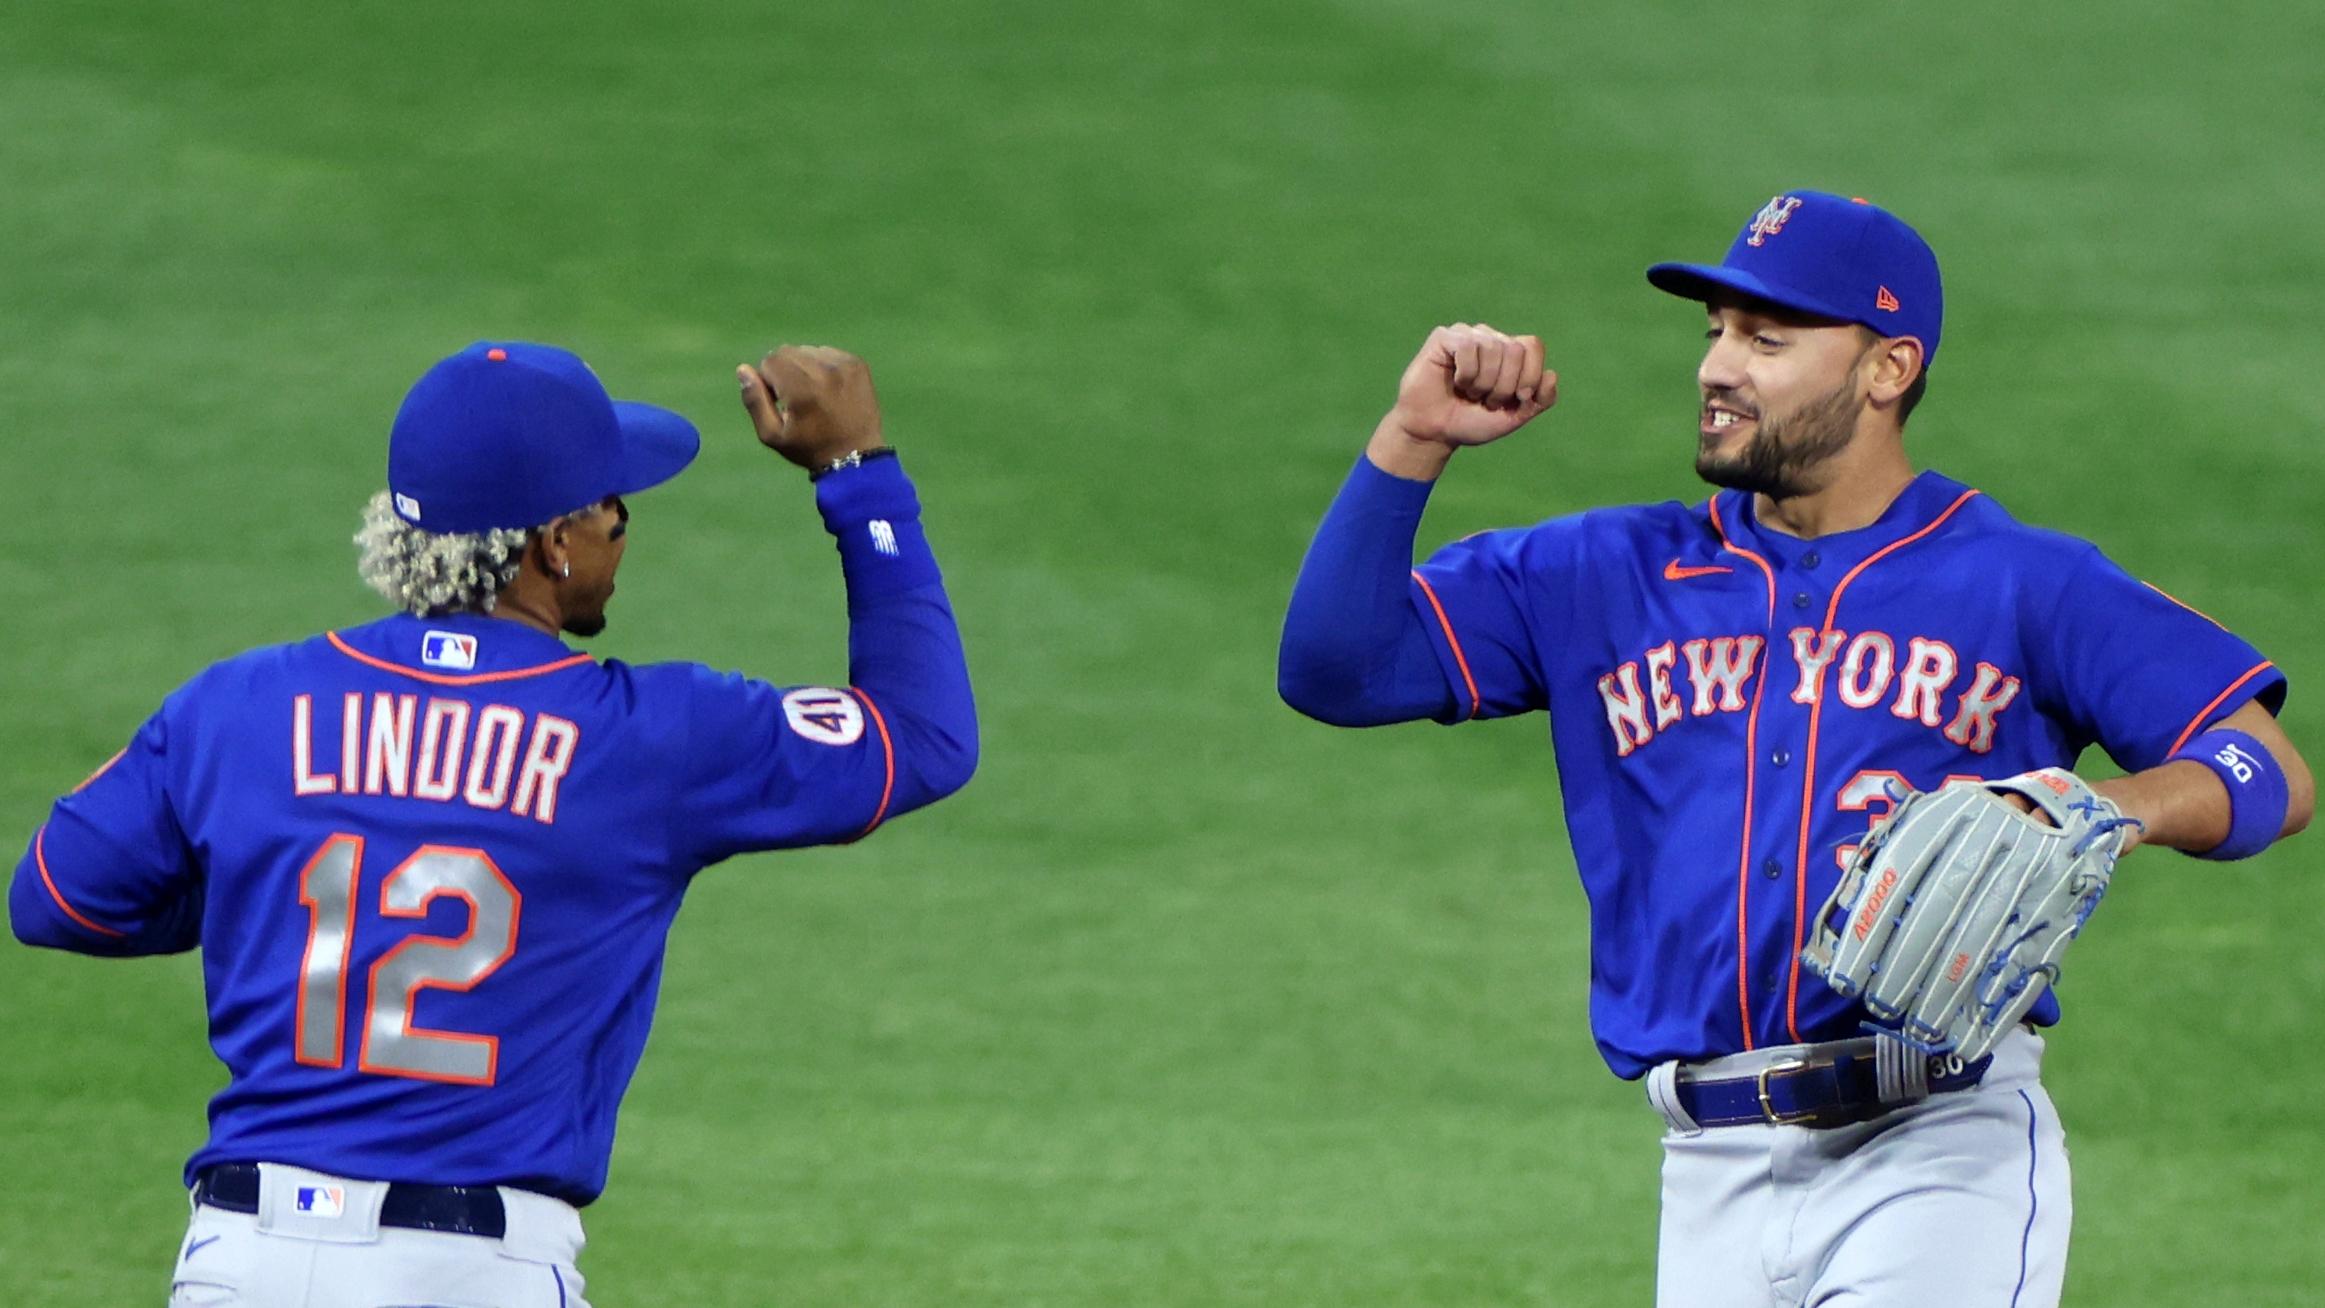 May 1, 2021; Philadelphia, Pennsylvania, USA; New York Mets shortstop Francisco Lindor (12) and right fielder Michael Conforto (30) celebrate victory over the Philadelphia Phillies at Citizens Bank Park. / Kam Nedd-USA TODAY Sports